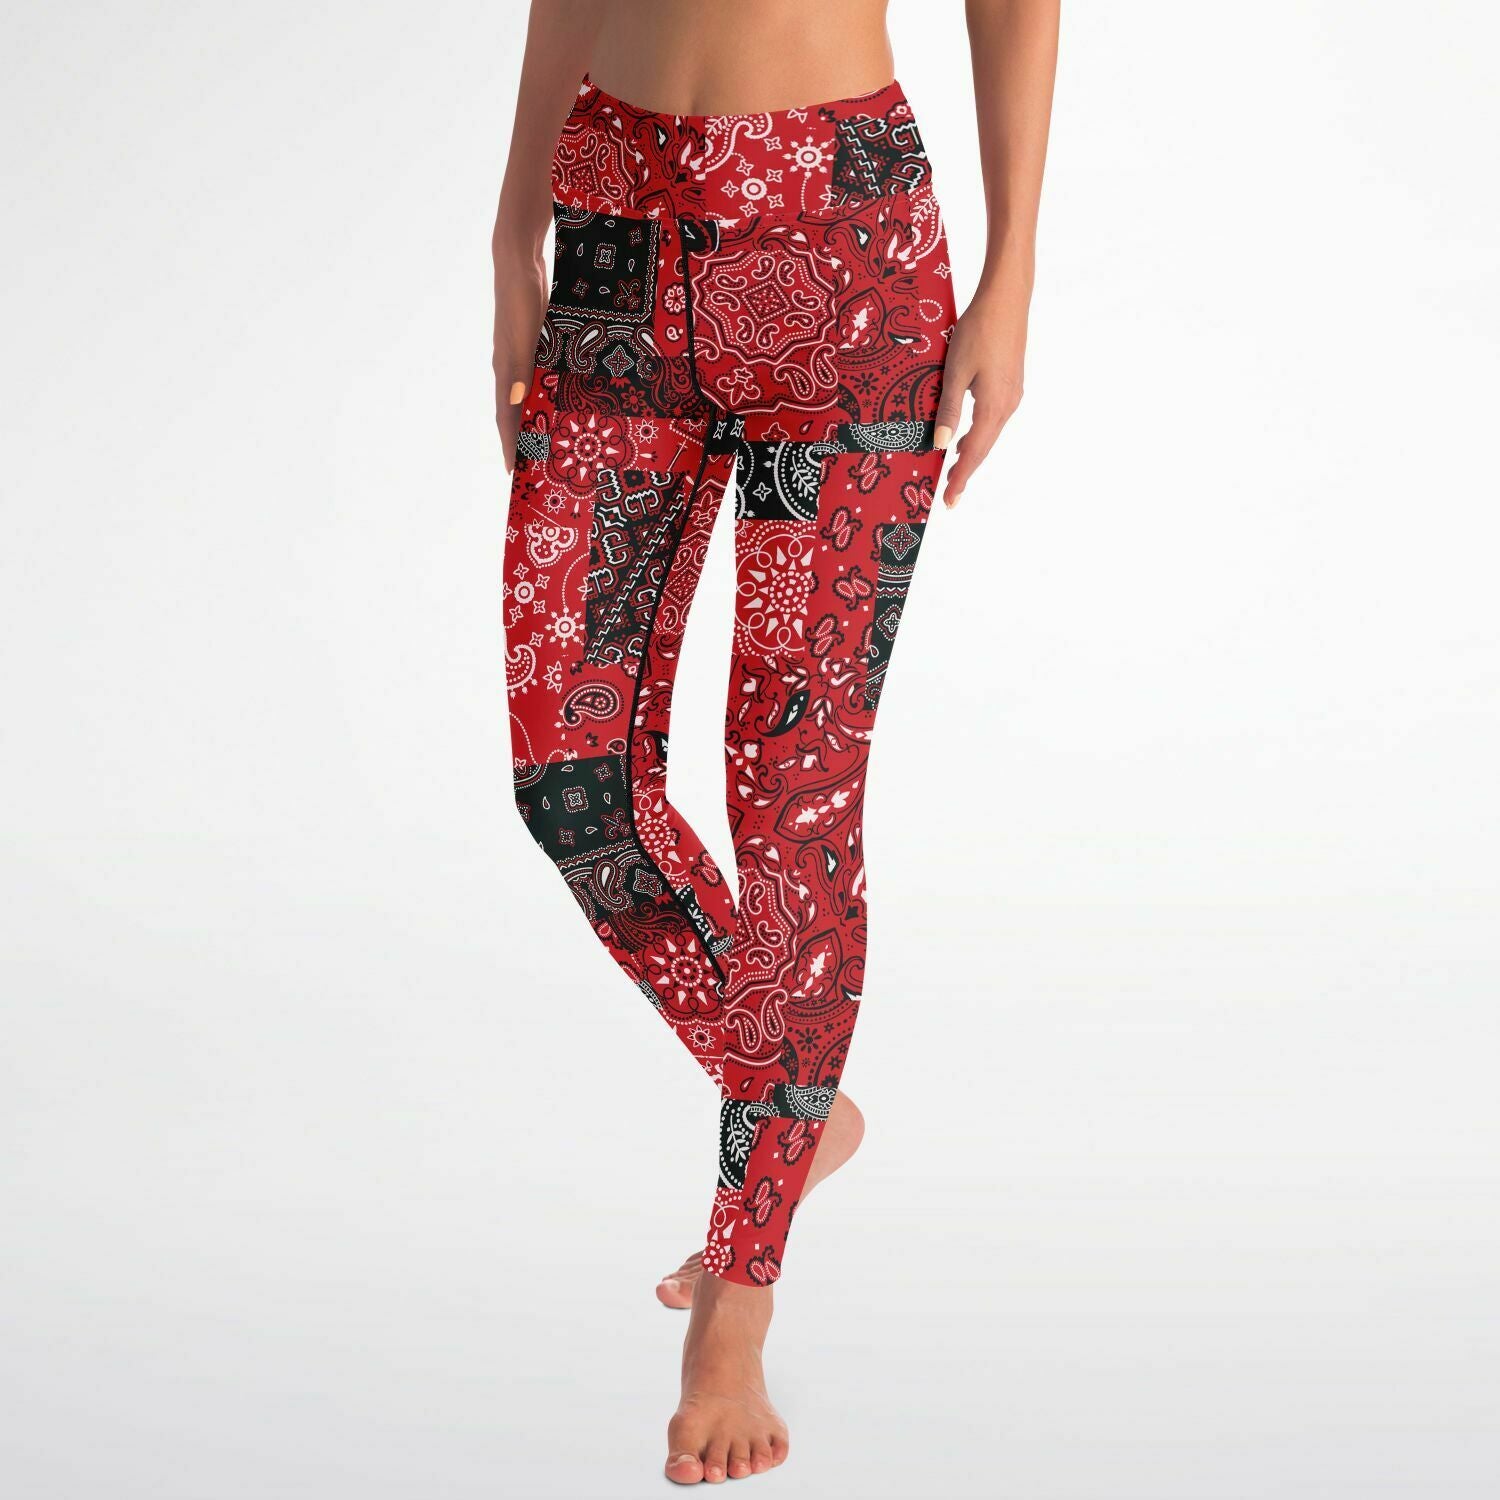 Women's Red Paisley Patchwork High-waisted Yoga Leggings